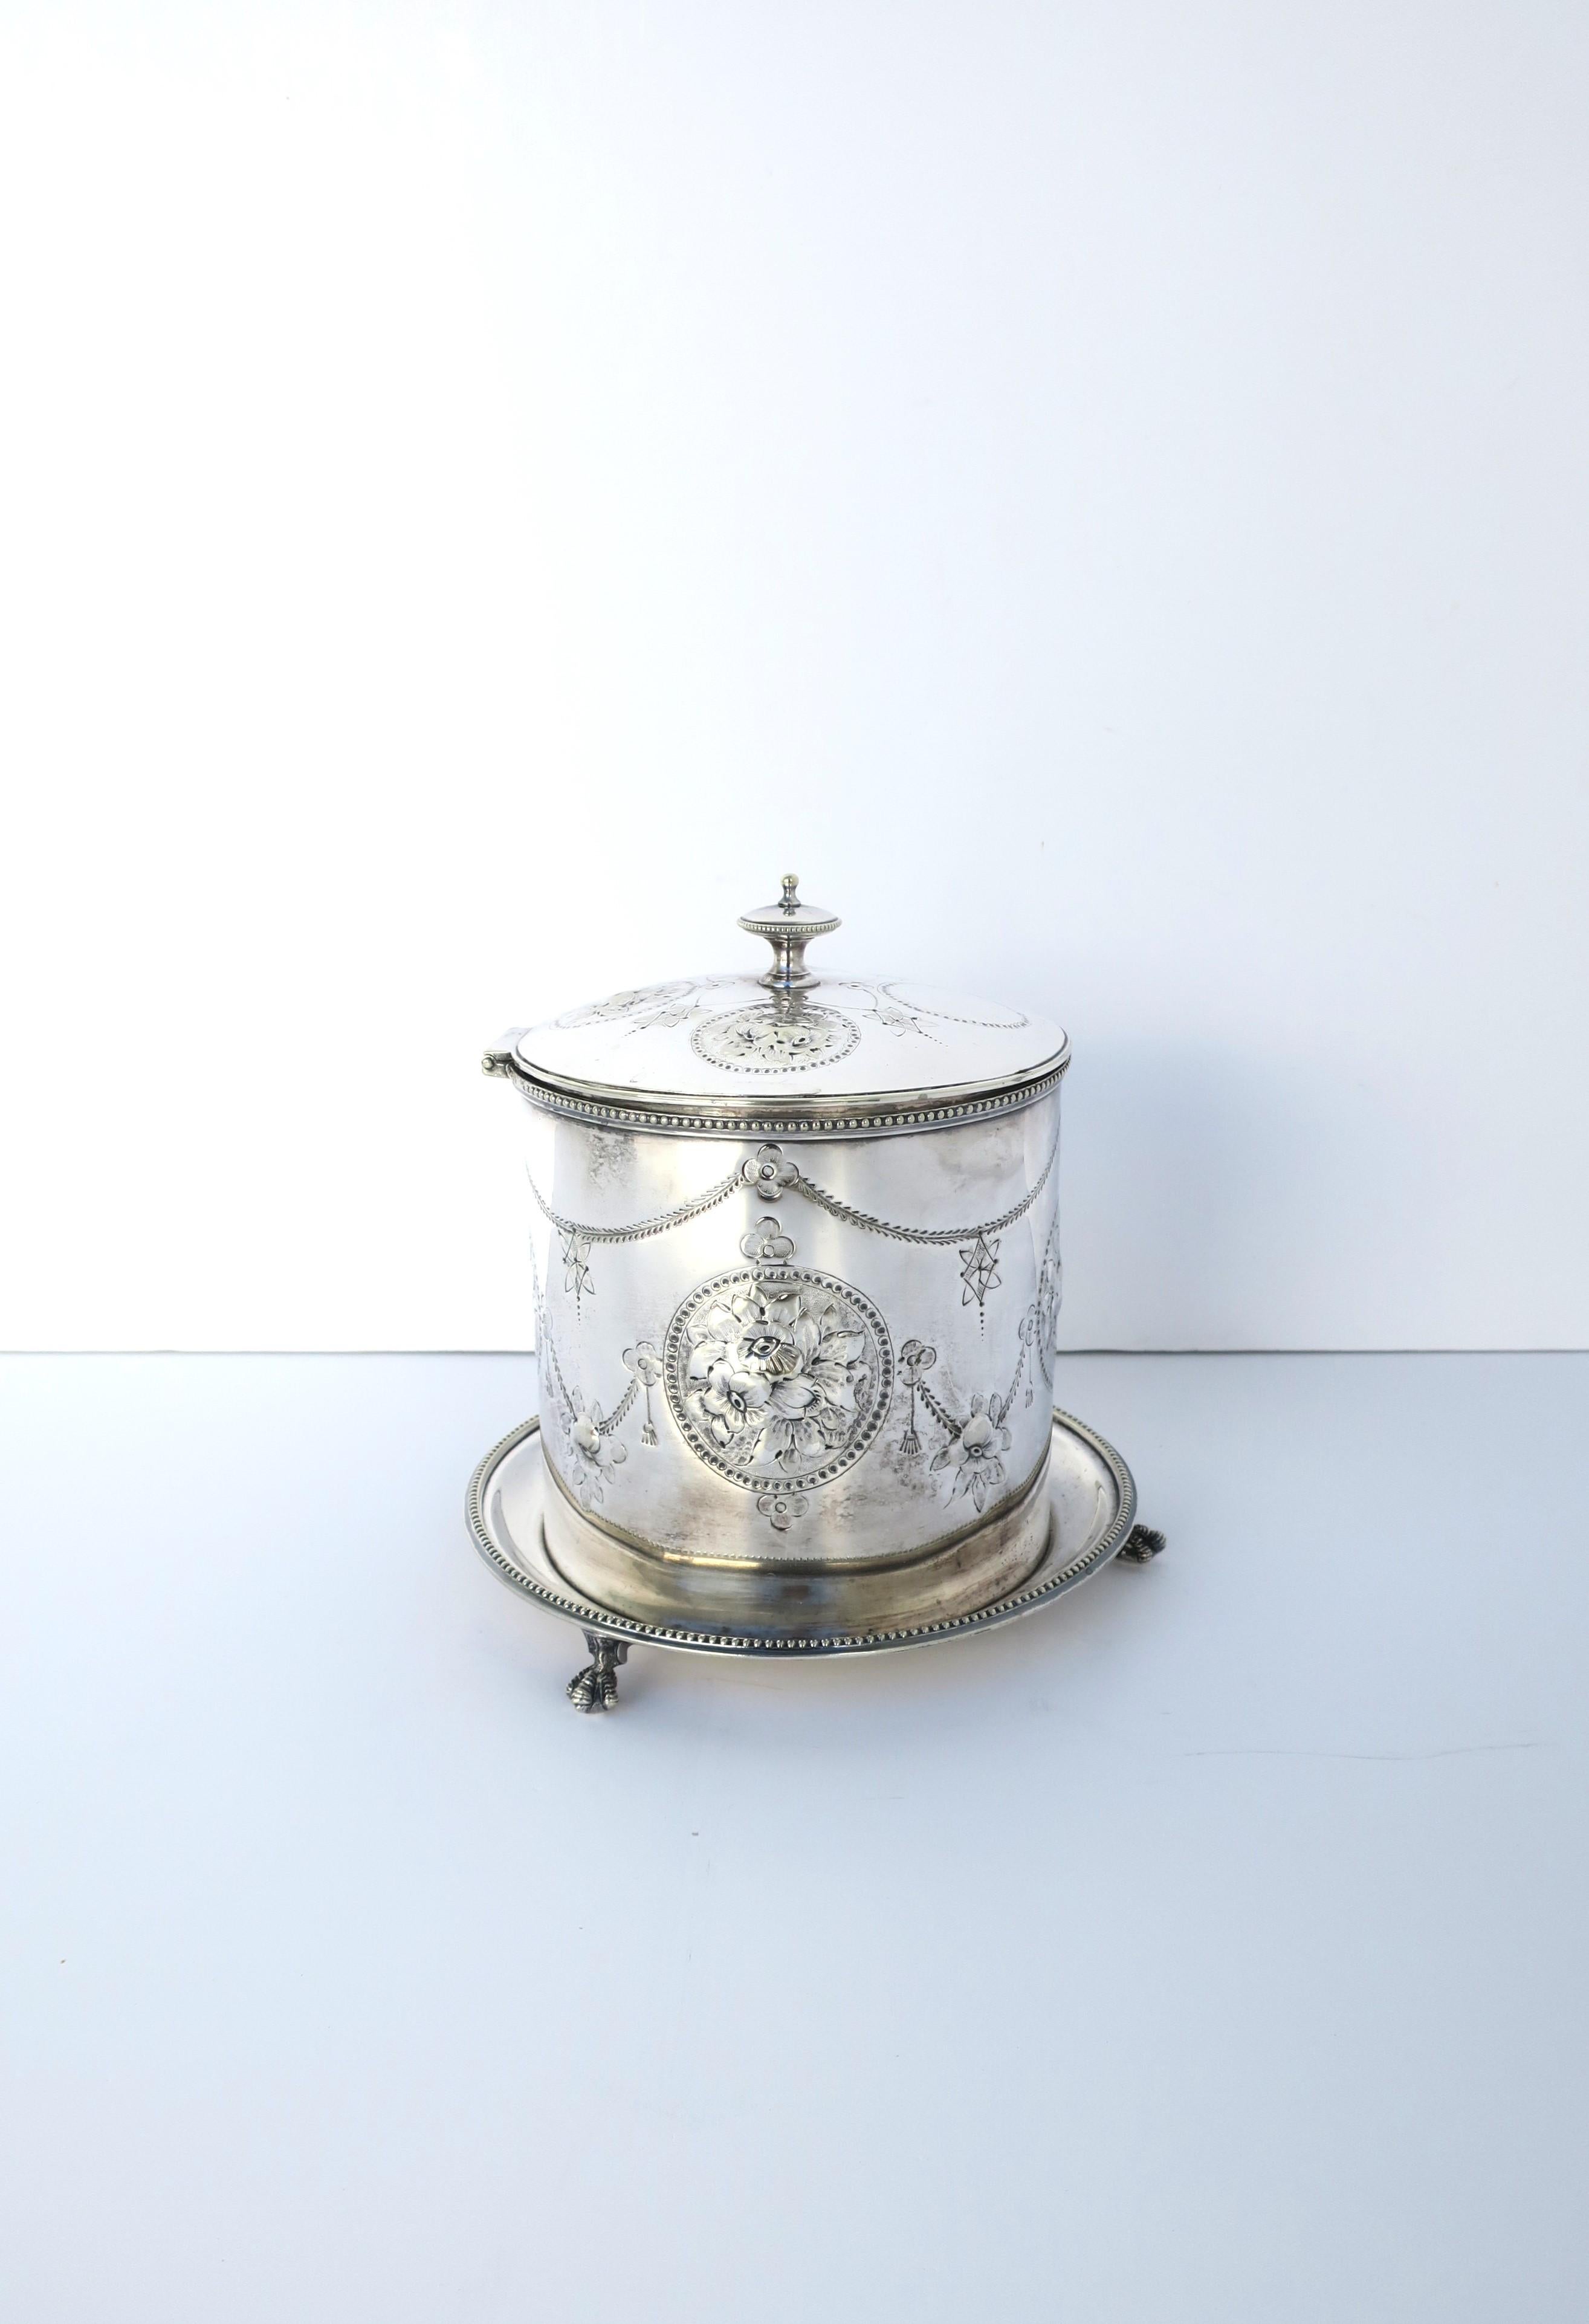 English Silver Plate Covered Biscuit Box or Tea Caddy For Sale 2